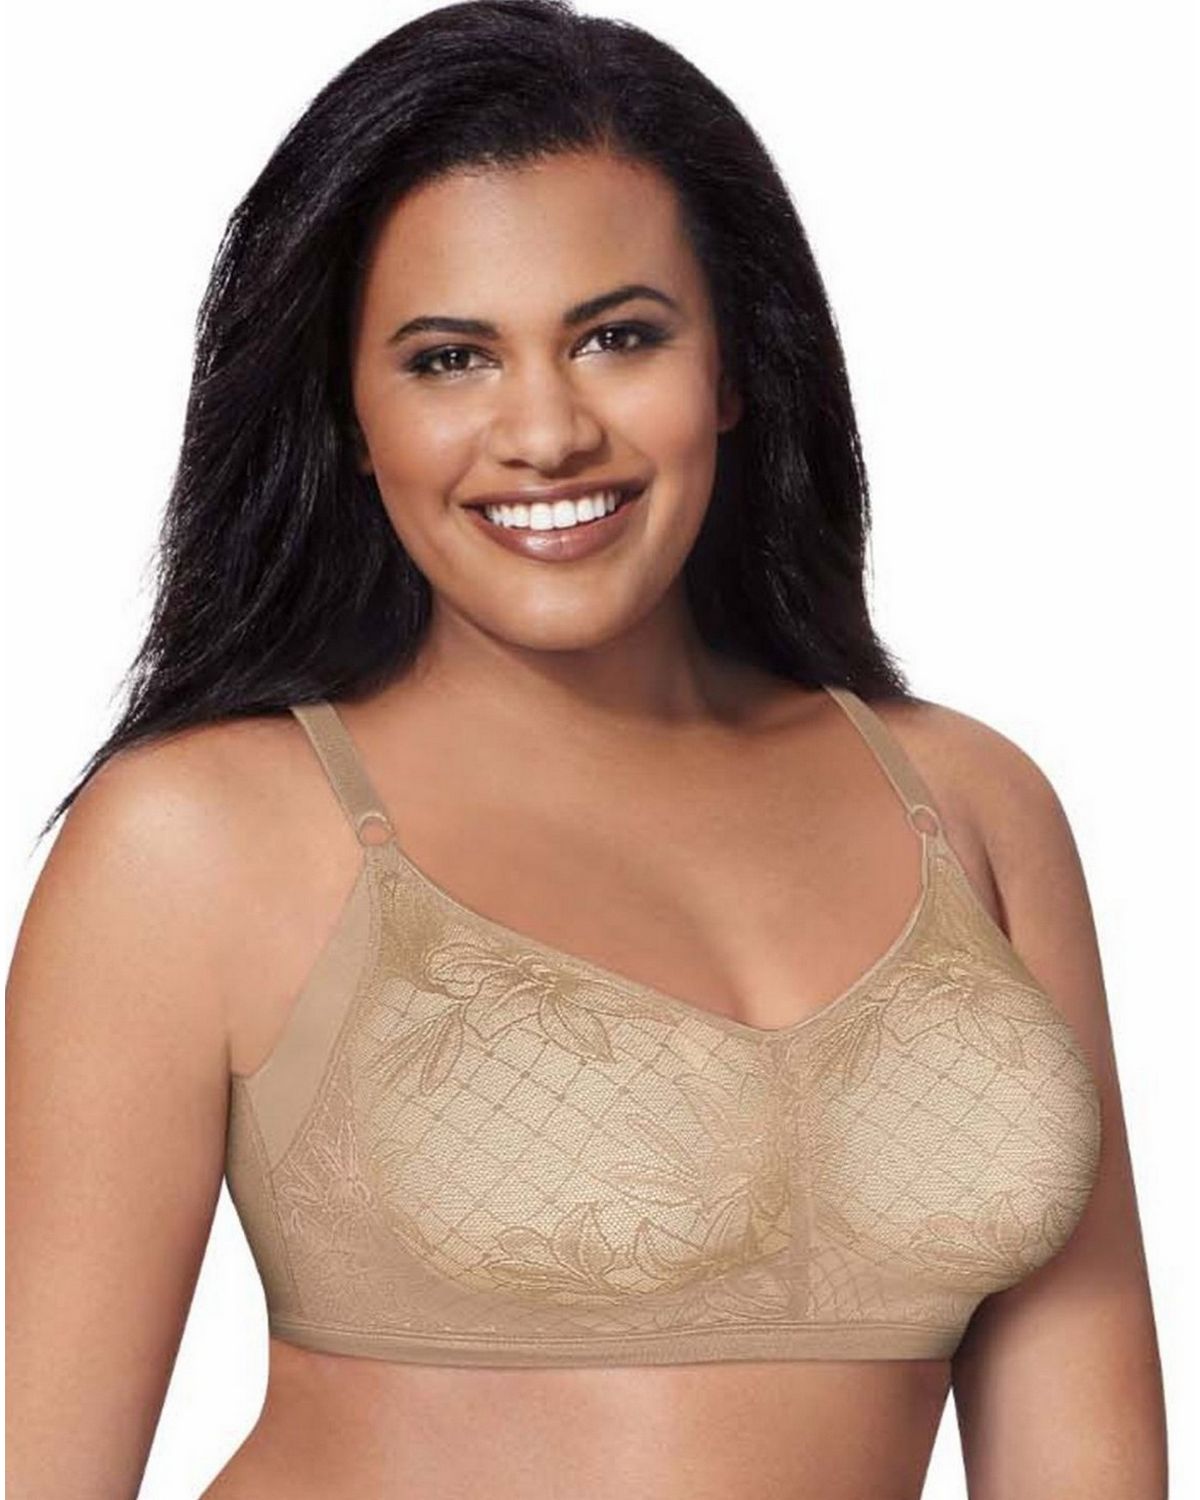 Side Slimming Rose Lace Push-Up Bra (FGH Cup) - Bras | Facebook Marketplace